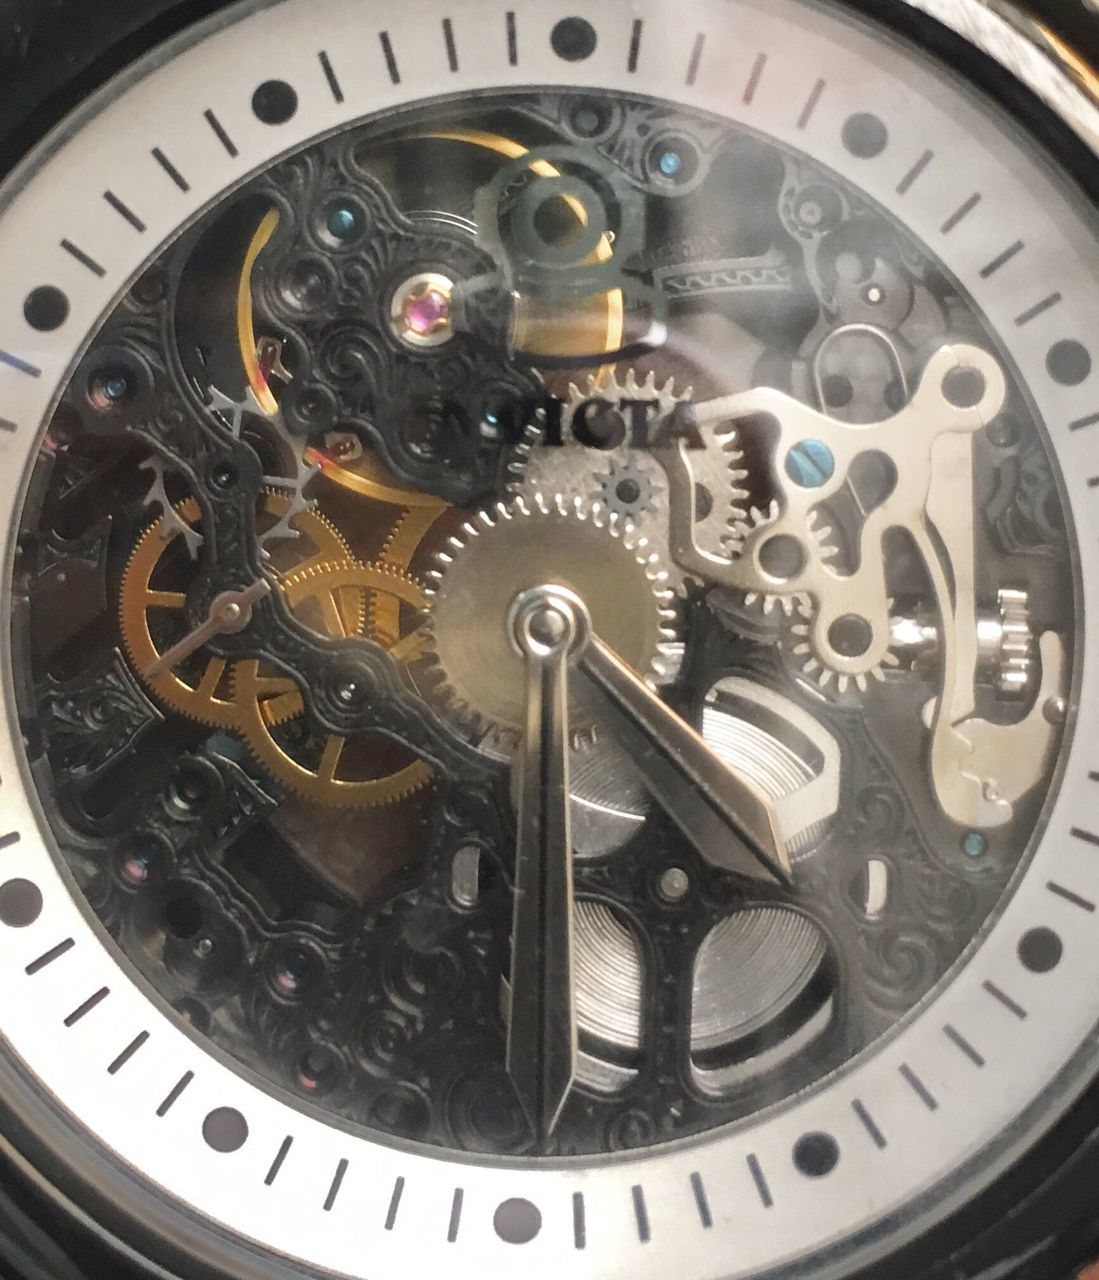 machine part, gear, metal, clockworks, accuracy, clock, time, machinery, equipment, watch, technology, macro, pocket watch, close-up, wheel, wristwatch, gold colored, no people, cooperation, manufacturing equipment, minute hand, day